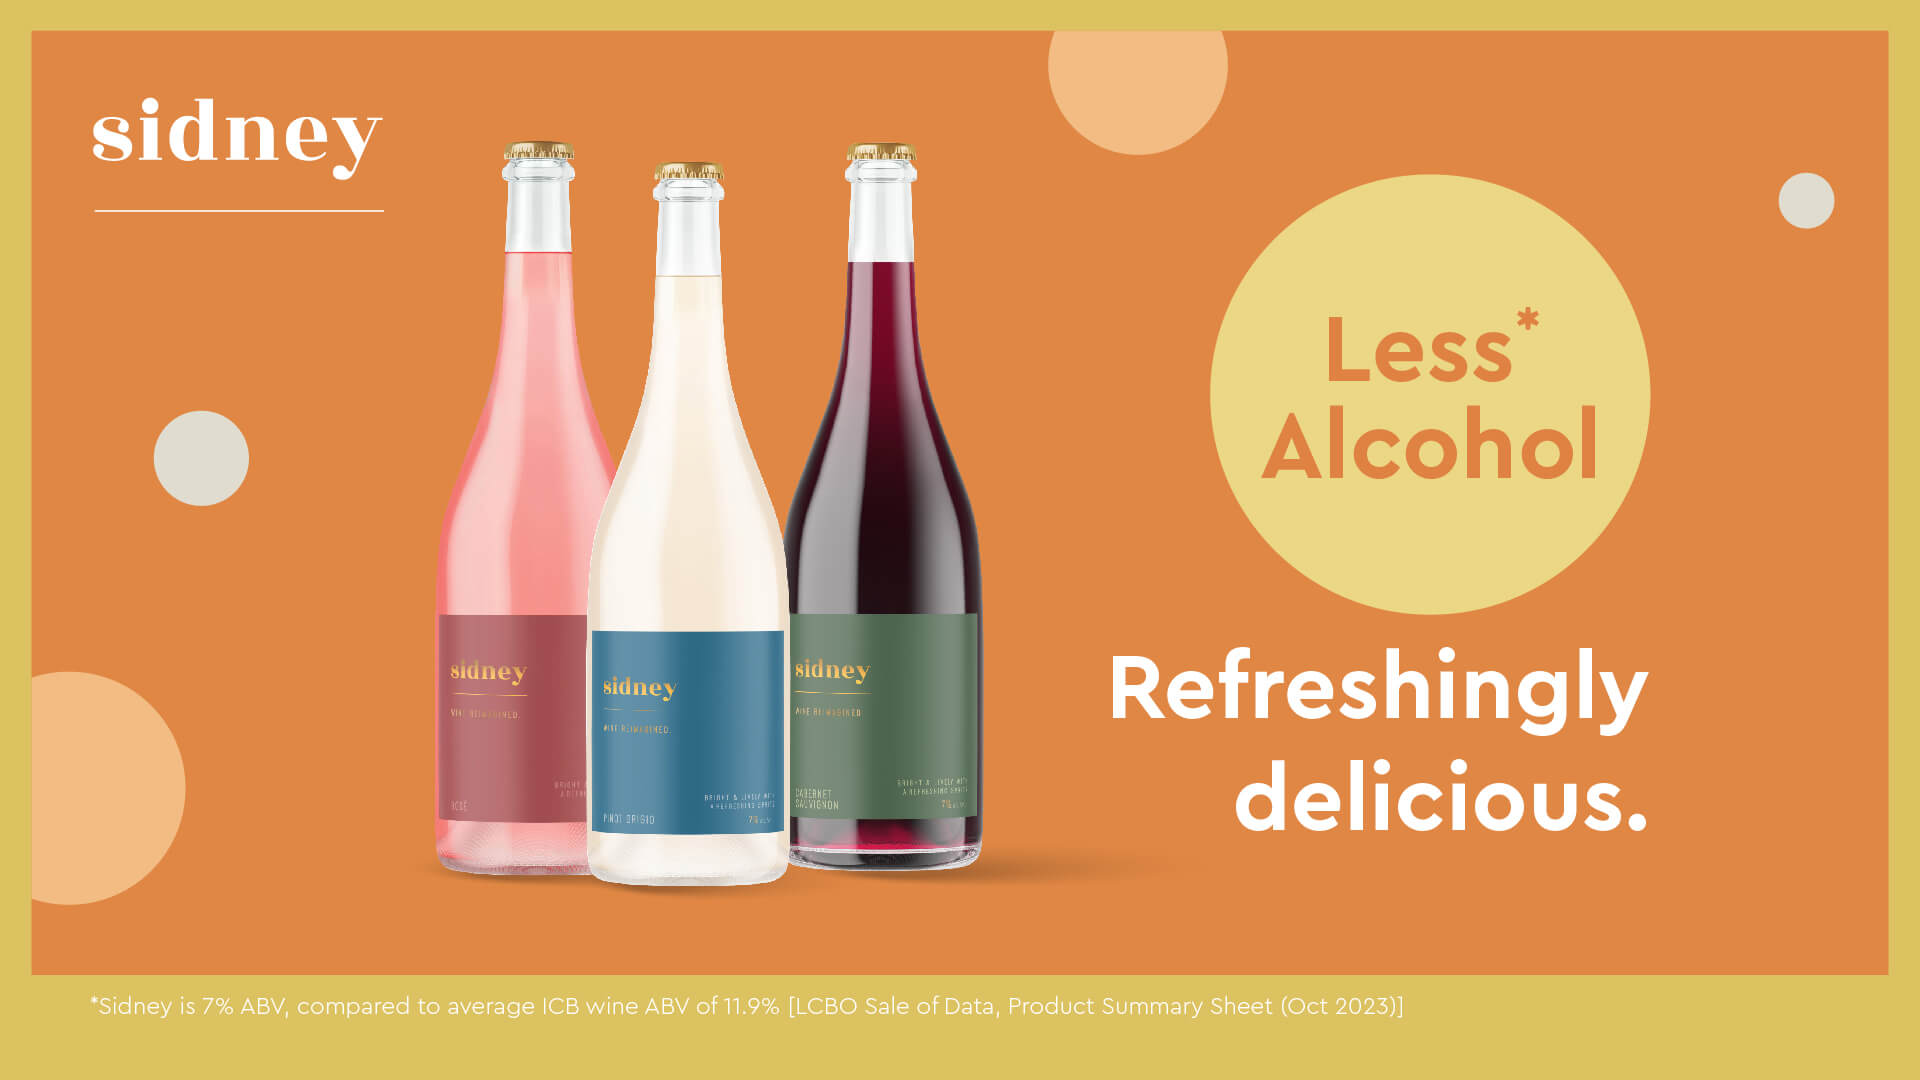 New and Exclusive! Sidney wine- less alcohol, refreshingly delicious!